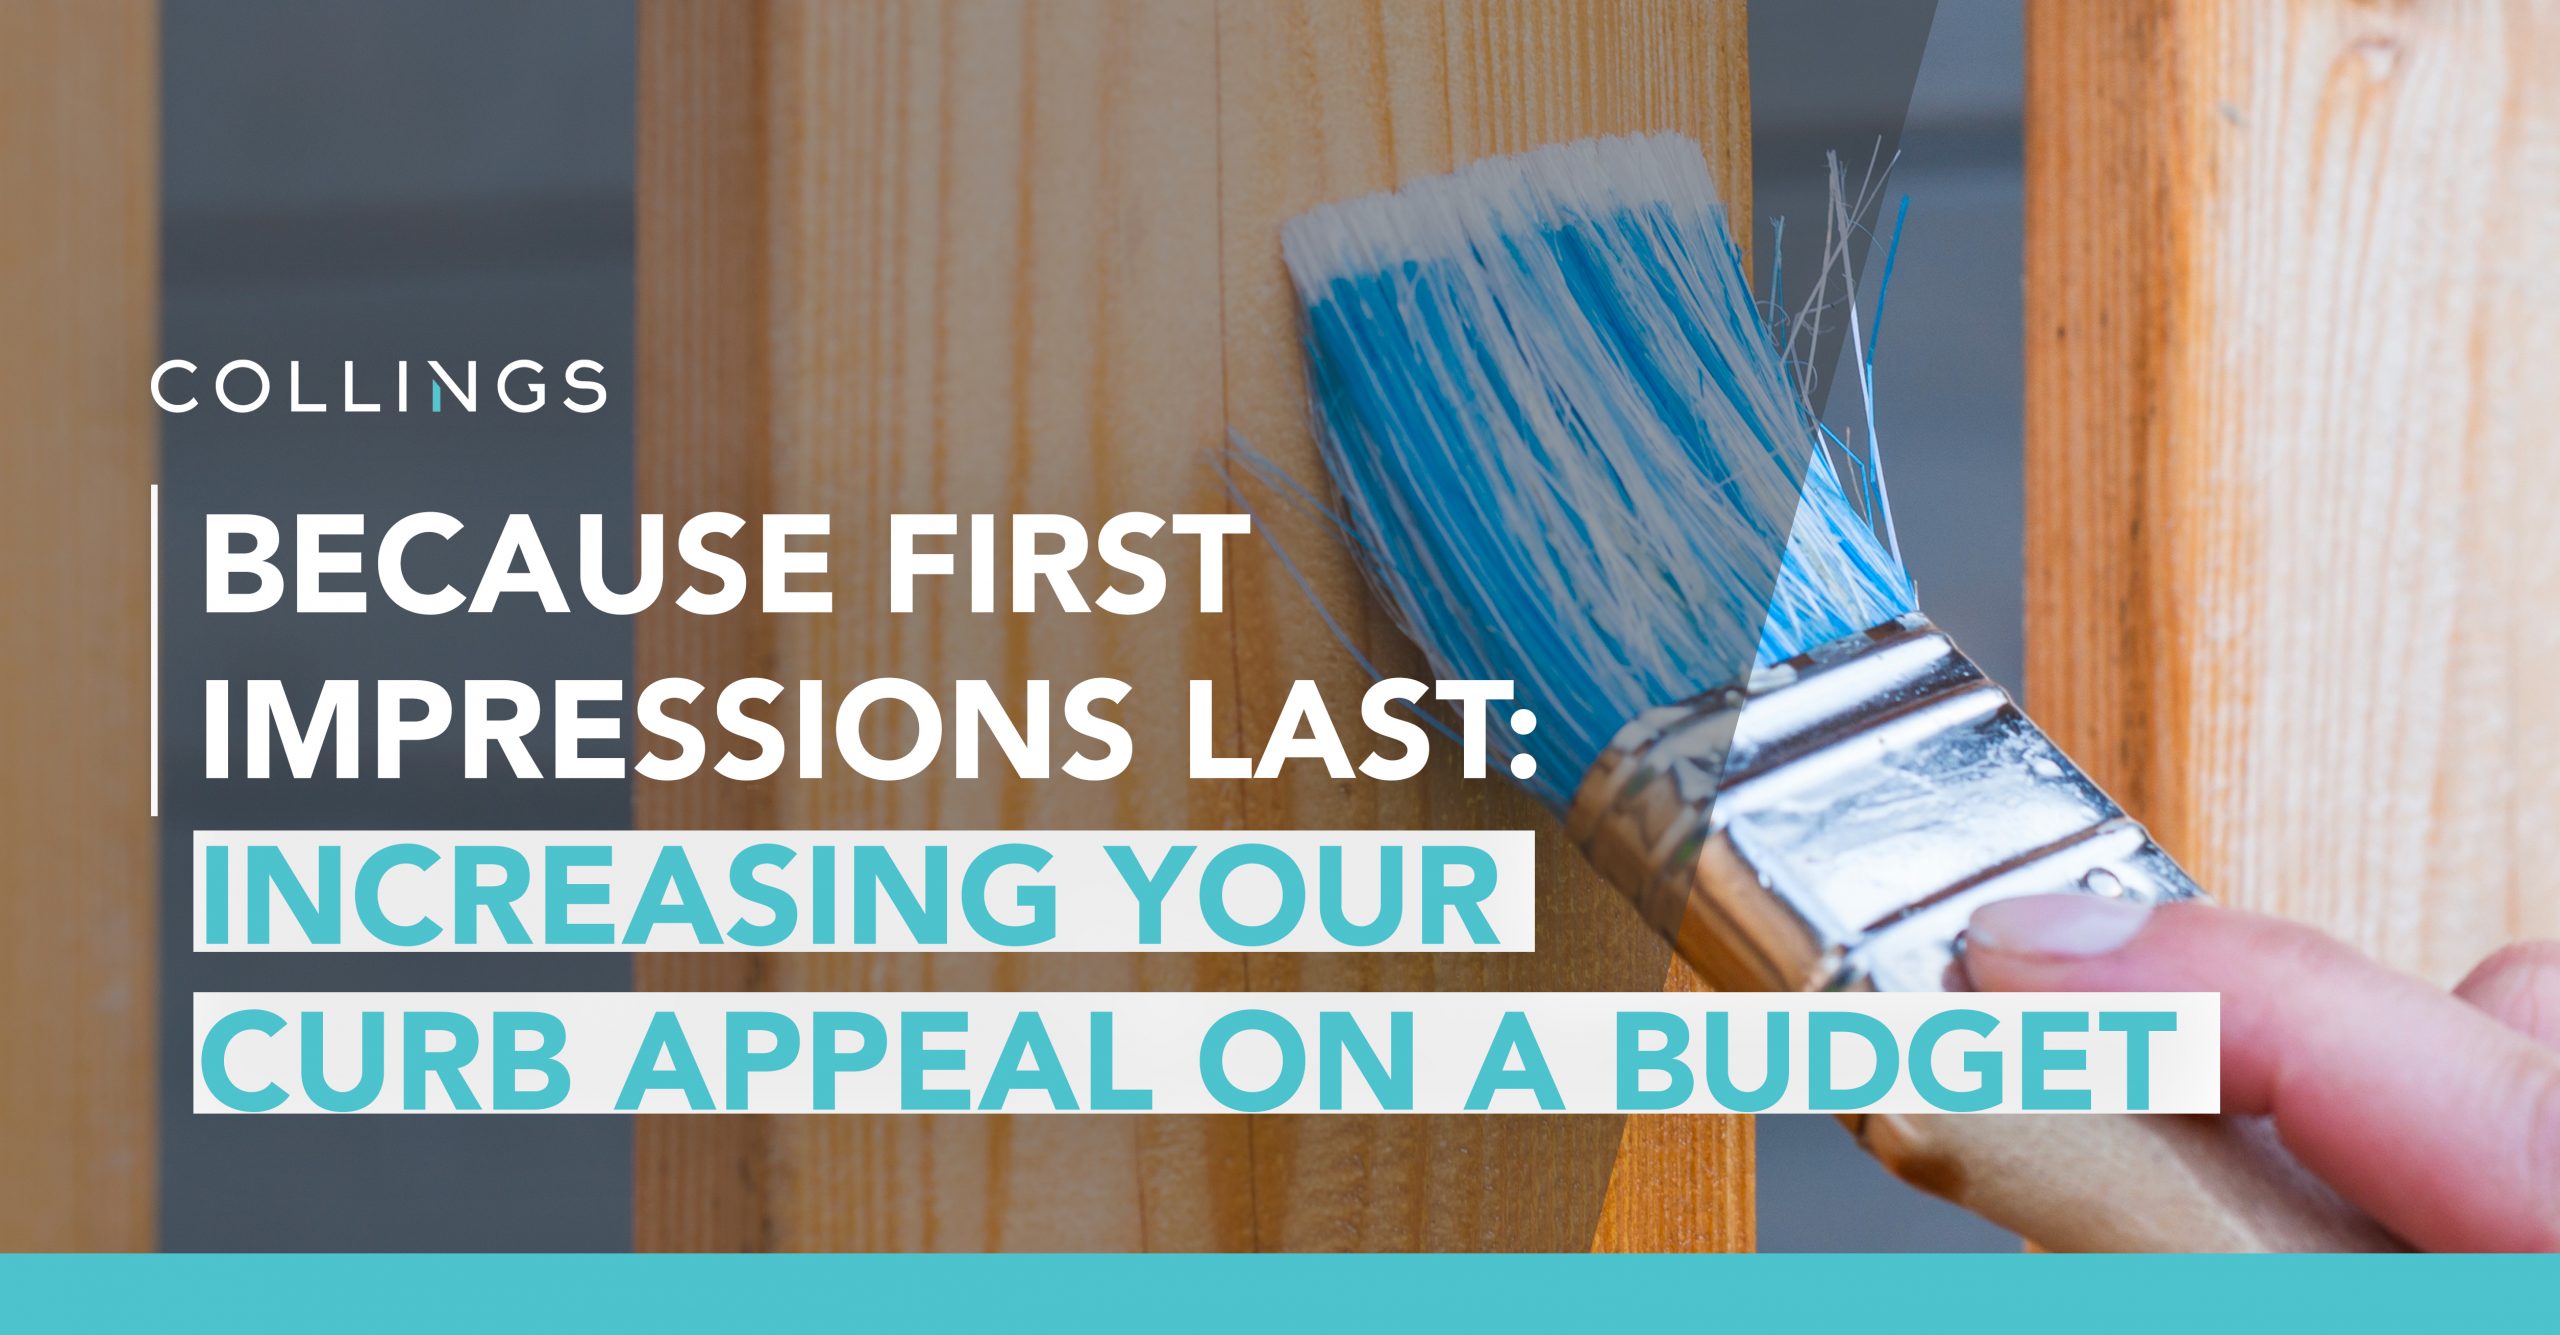 Because First Impressions Last: Increasing Your Curb Appeal on a Budget